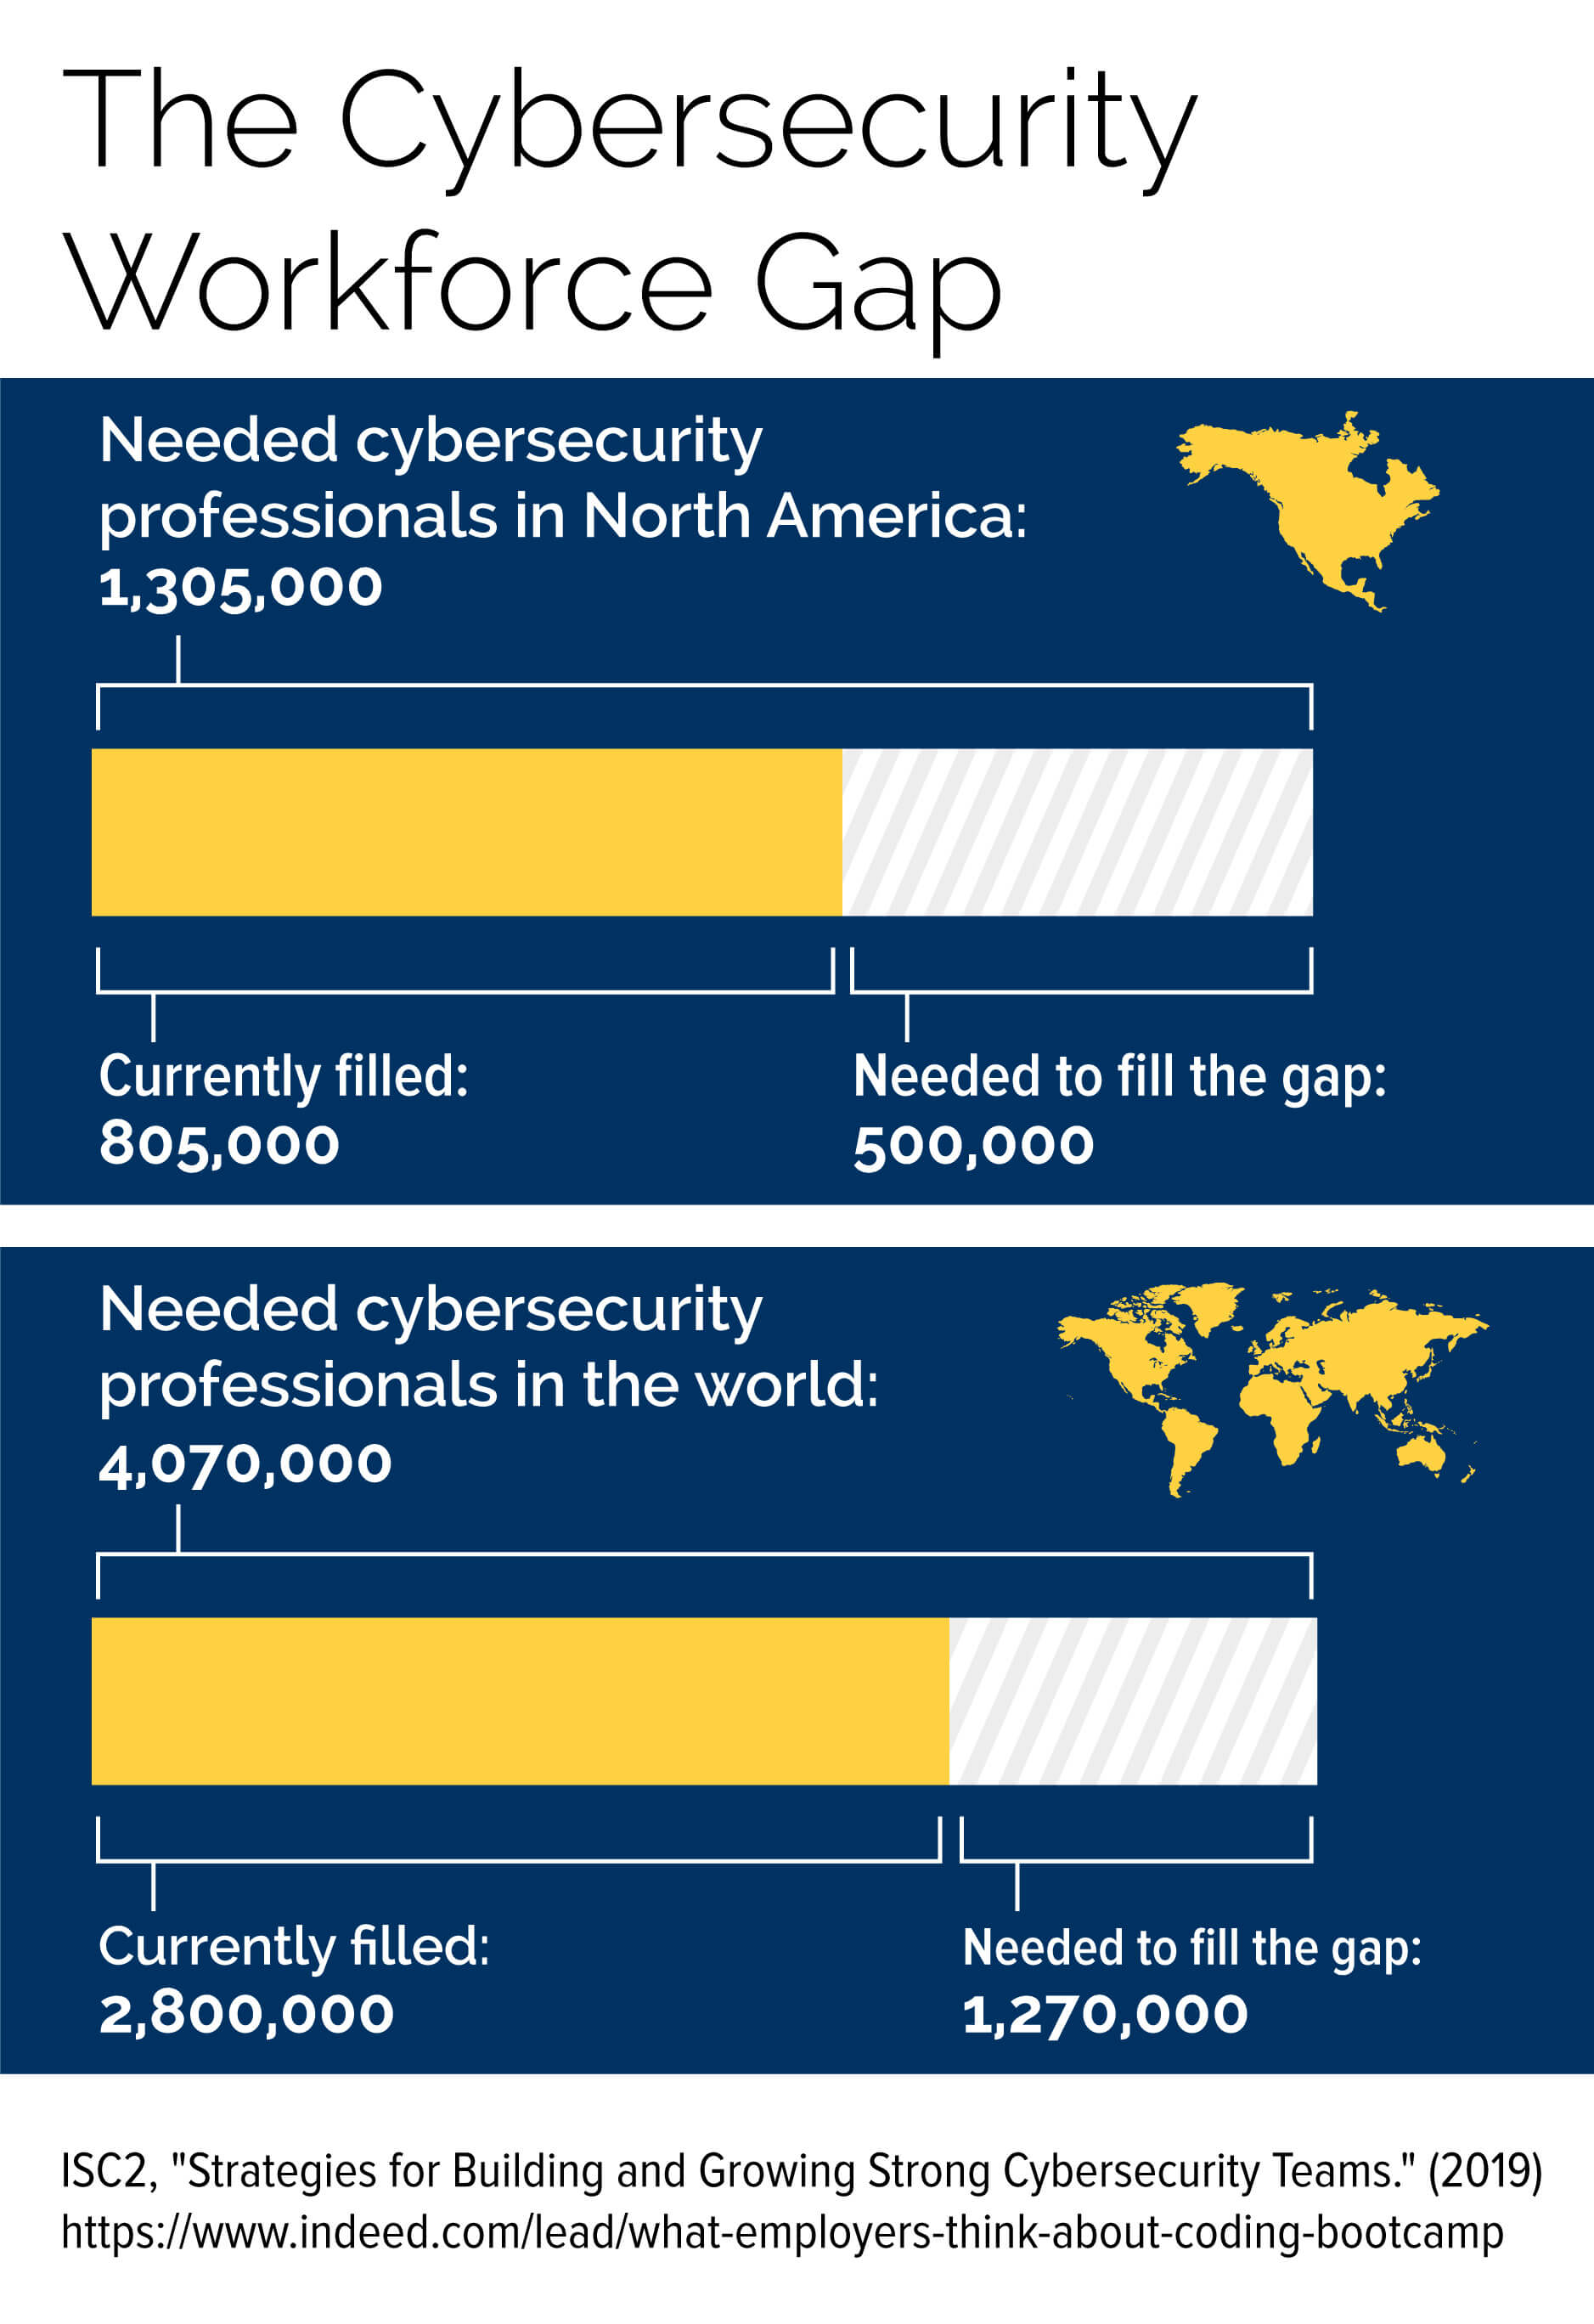 A chart showing the number of unfilled cybersecurity jobs